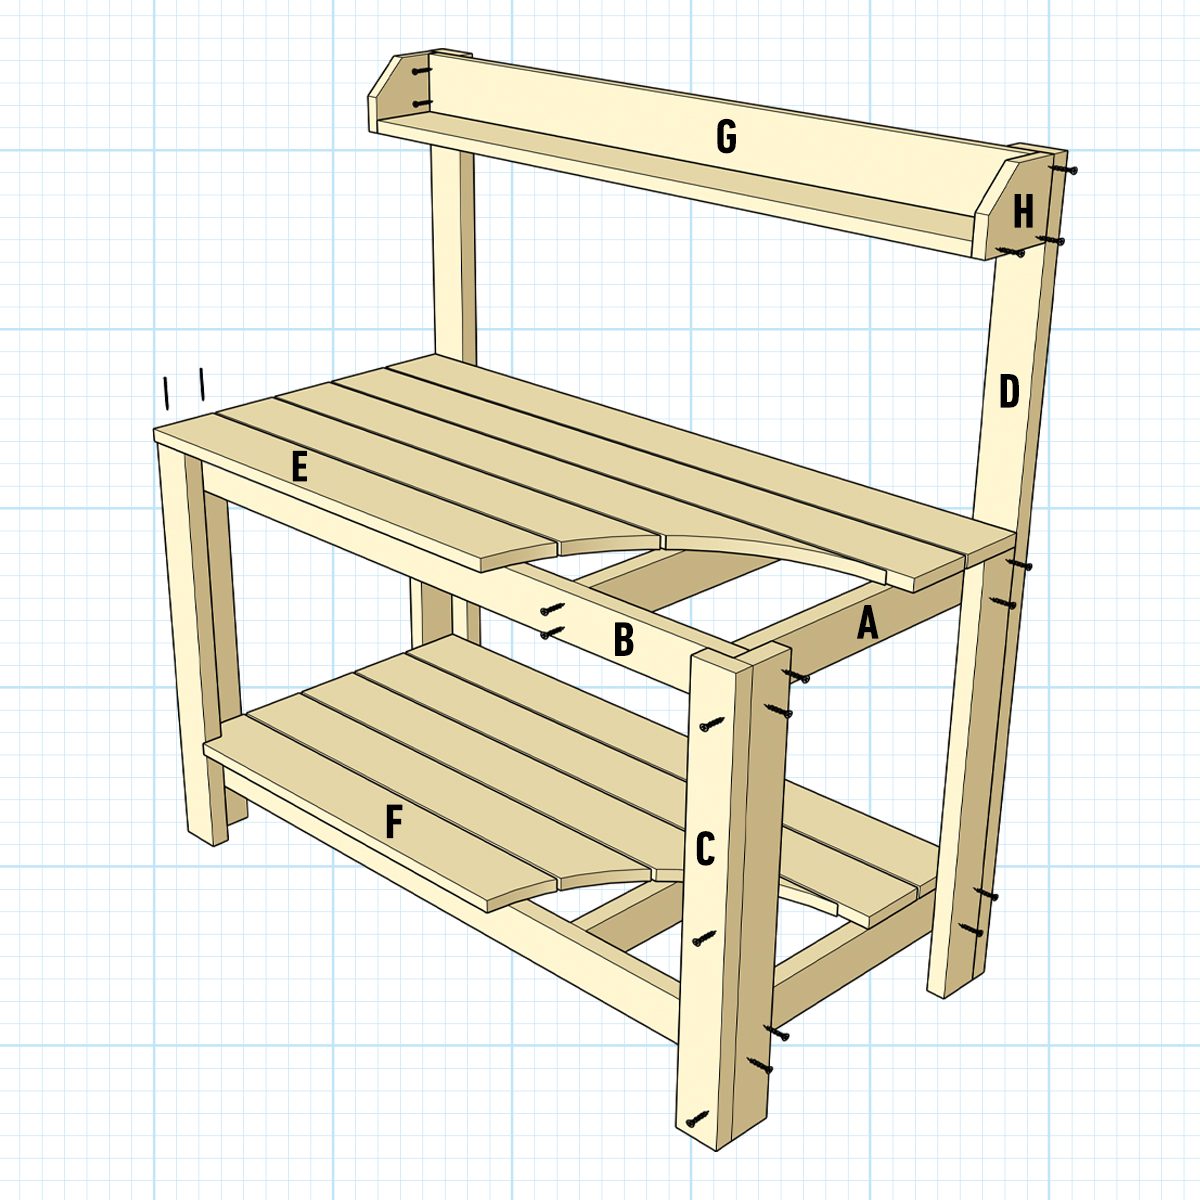 Fh22sep 620 56 Ta 01 How To Build A Simple Gardening Bench